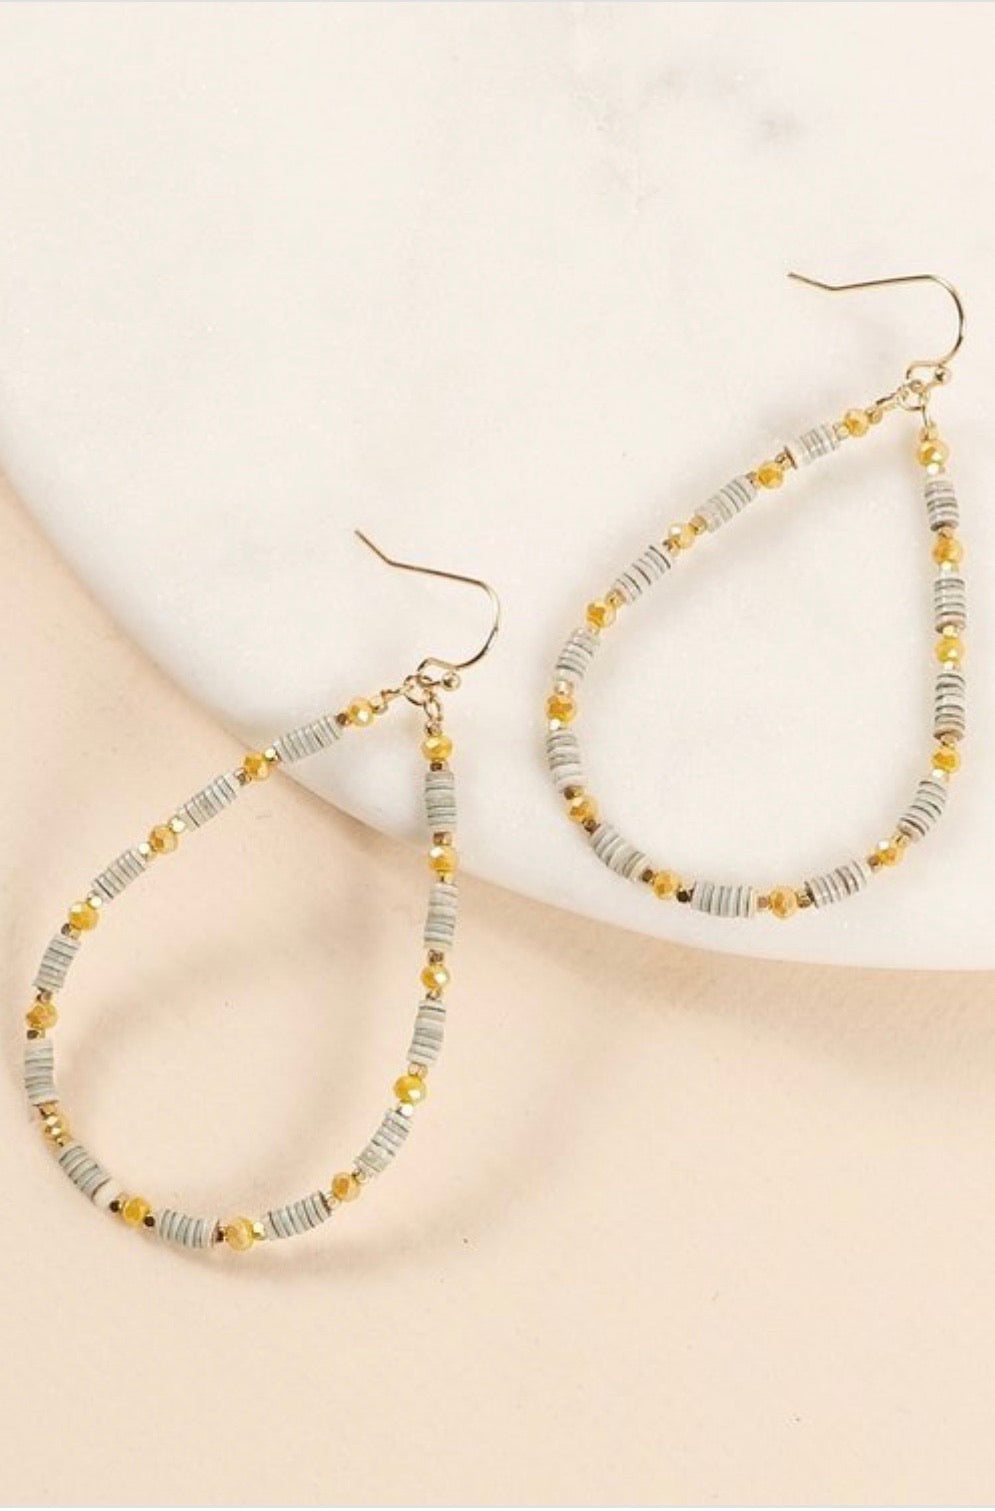 Tear Drop Glass Bead Earrings - Corinne an Affordable Women's Clothing Boutique in the US USA